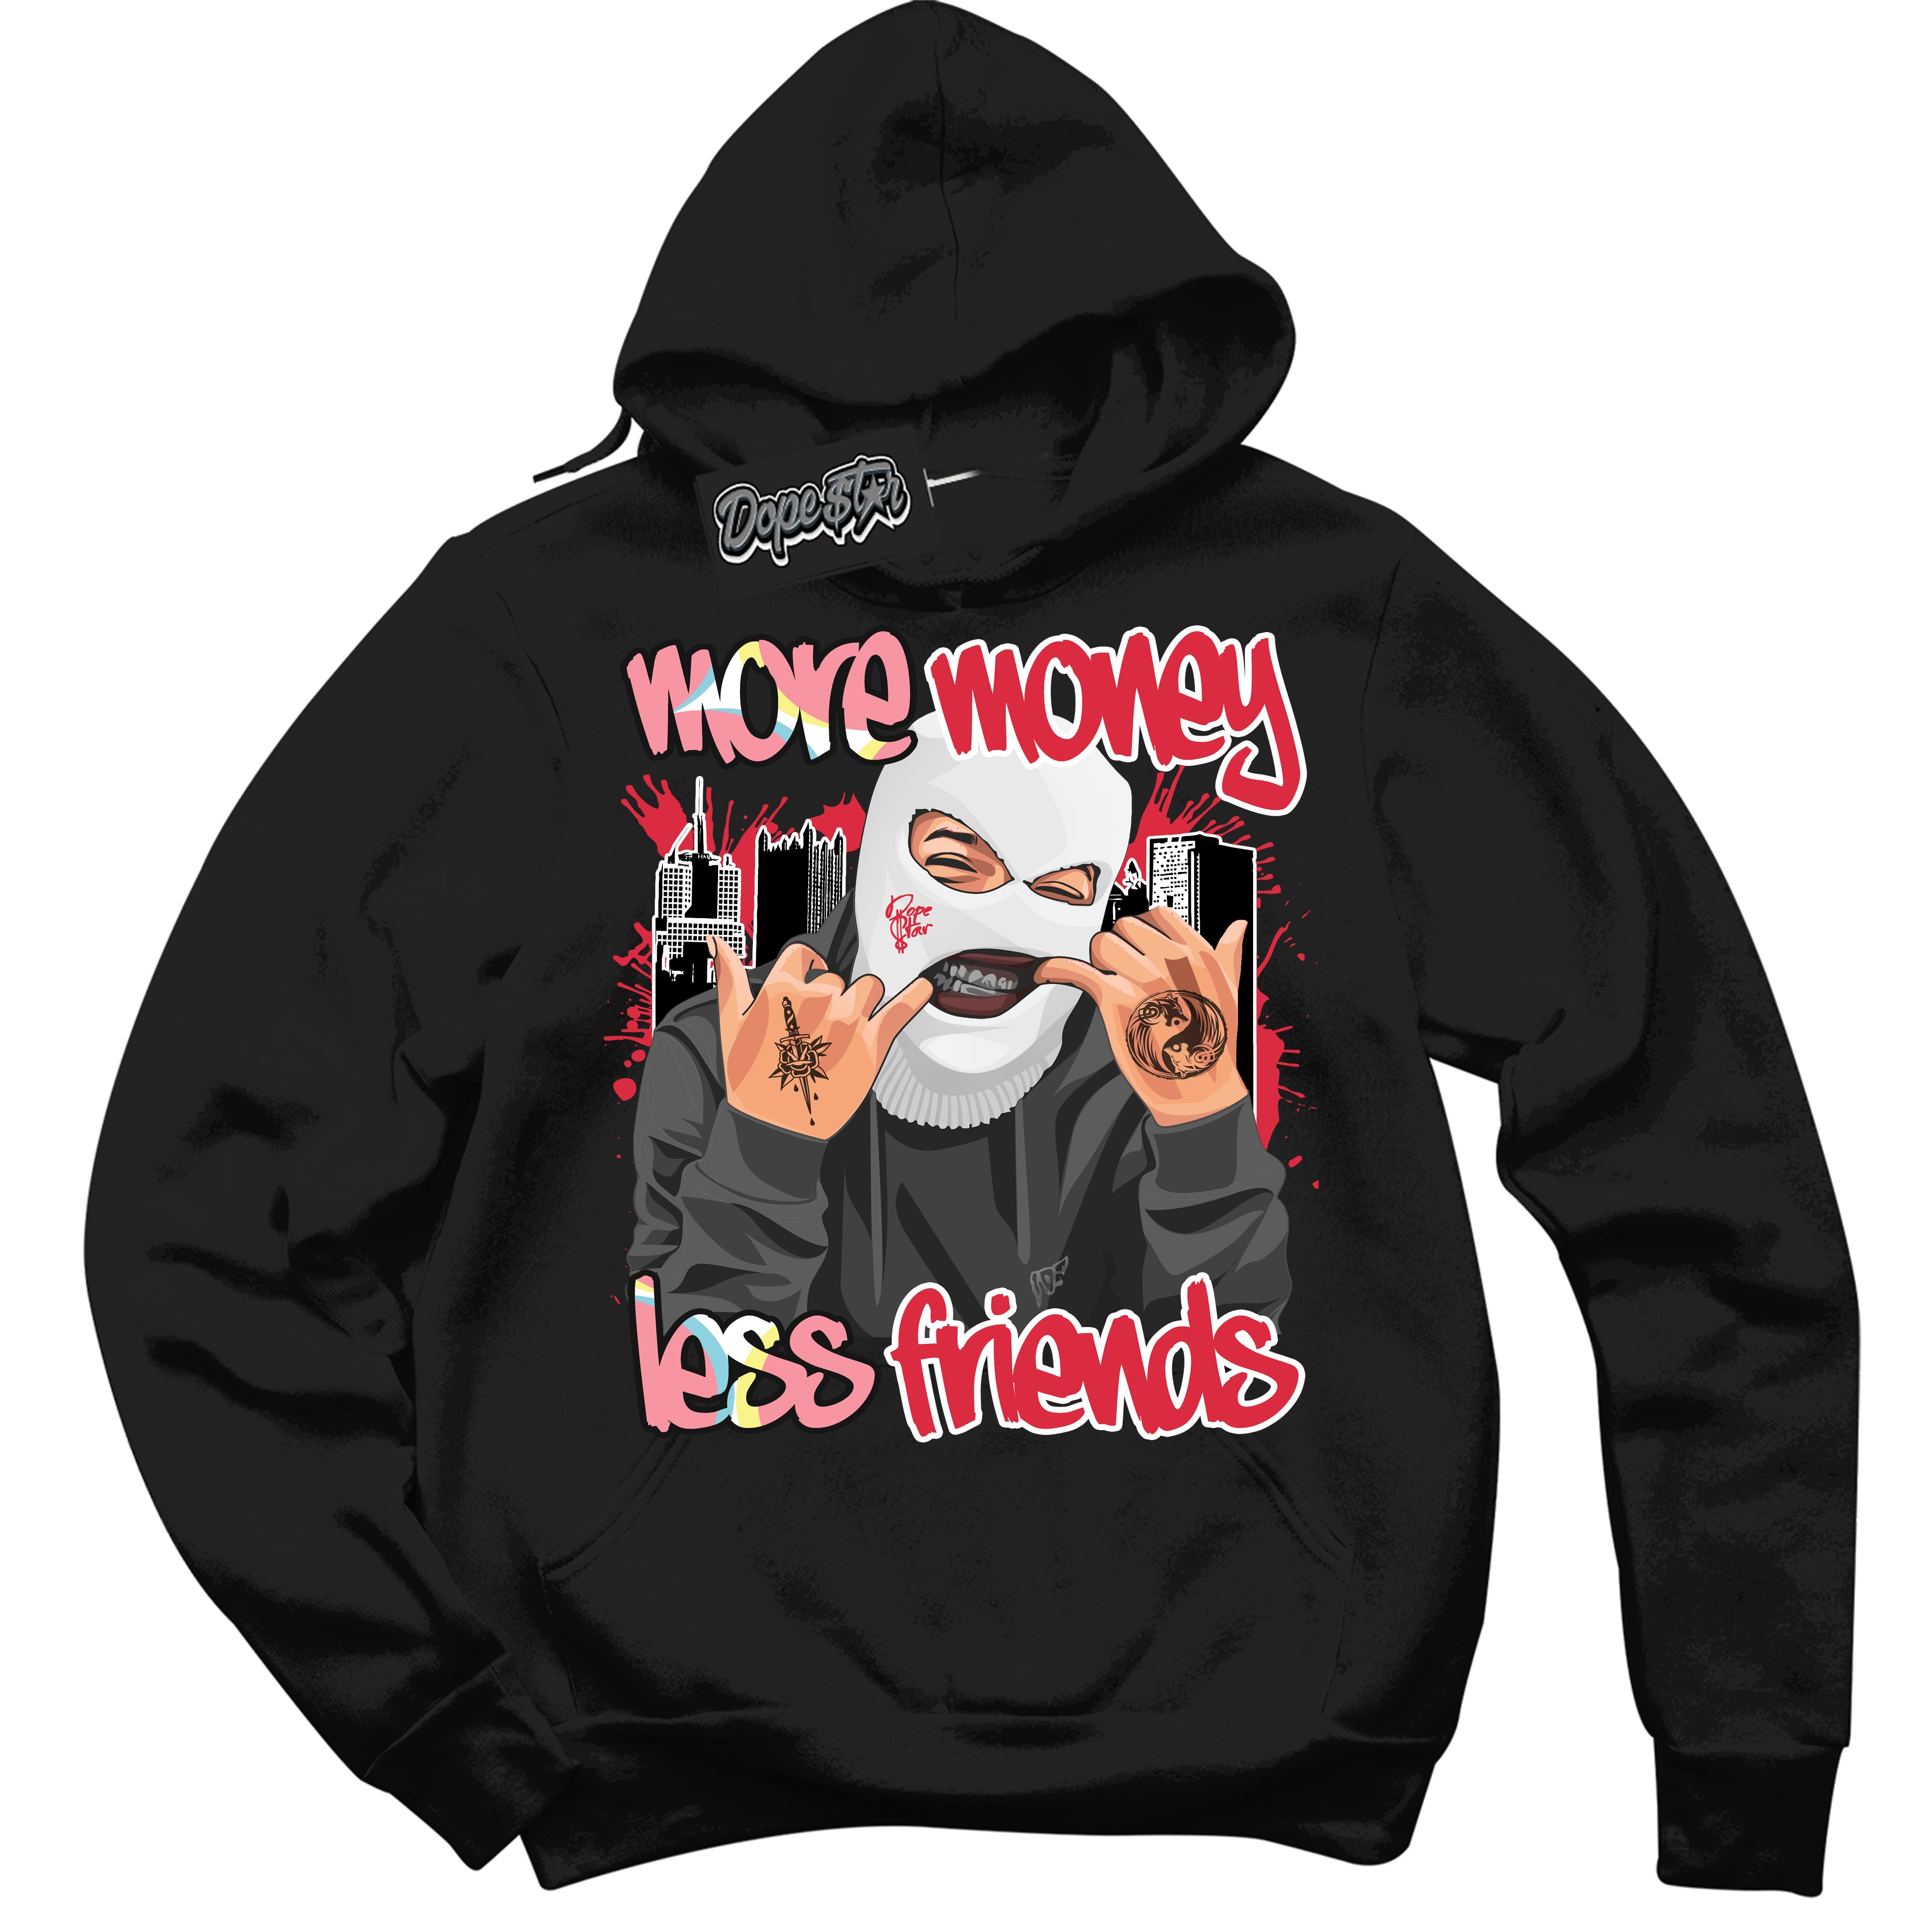 Cool Black Graphic DopeStar Hoodie with “ More Money Less Friends “ print, that perfectly matches Spider-Verse 1s sneakers